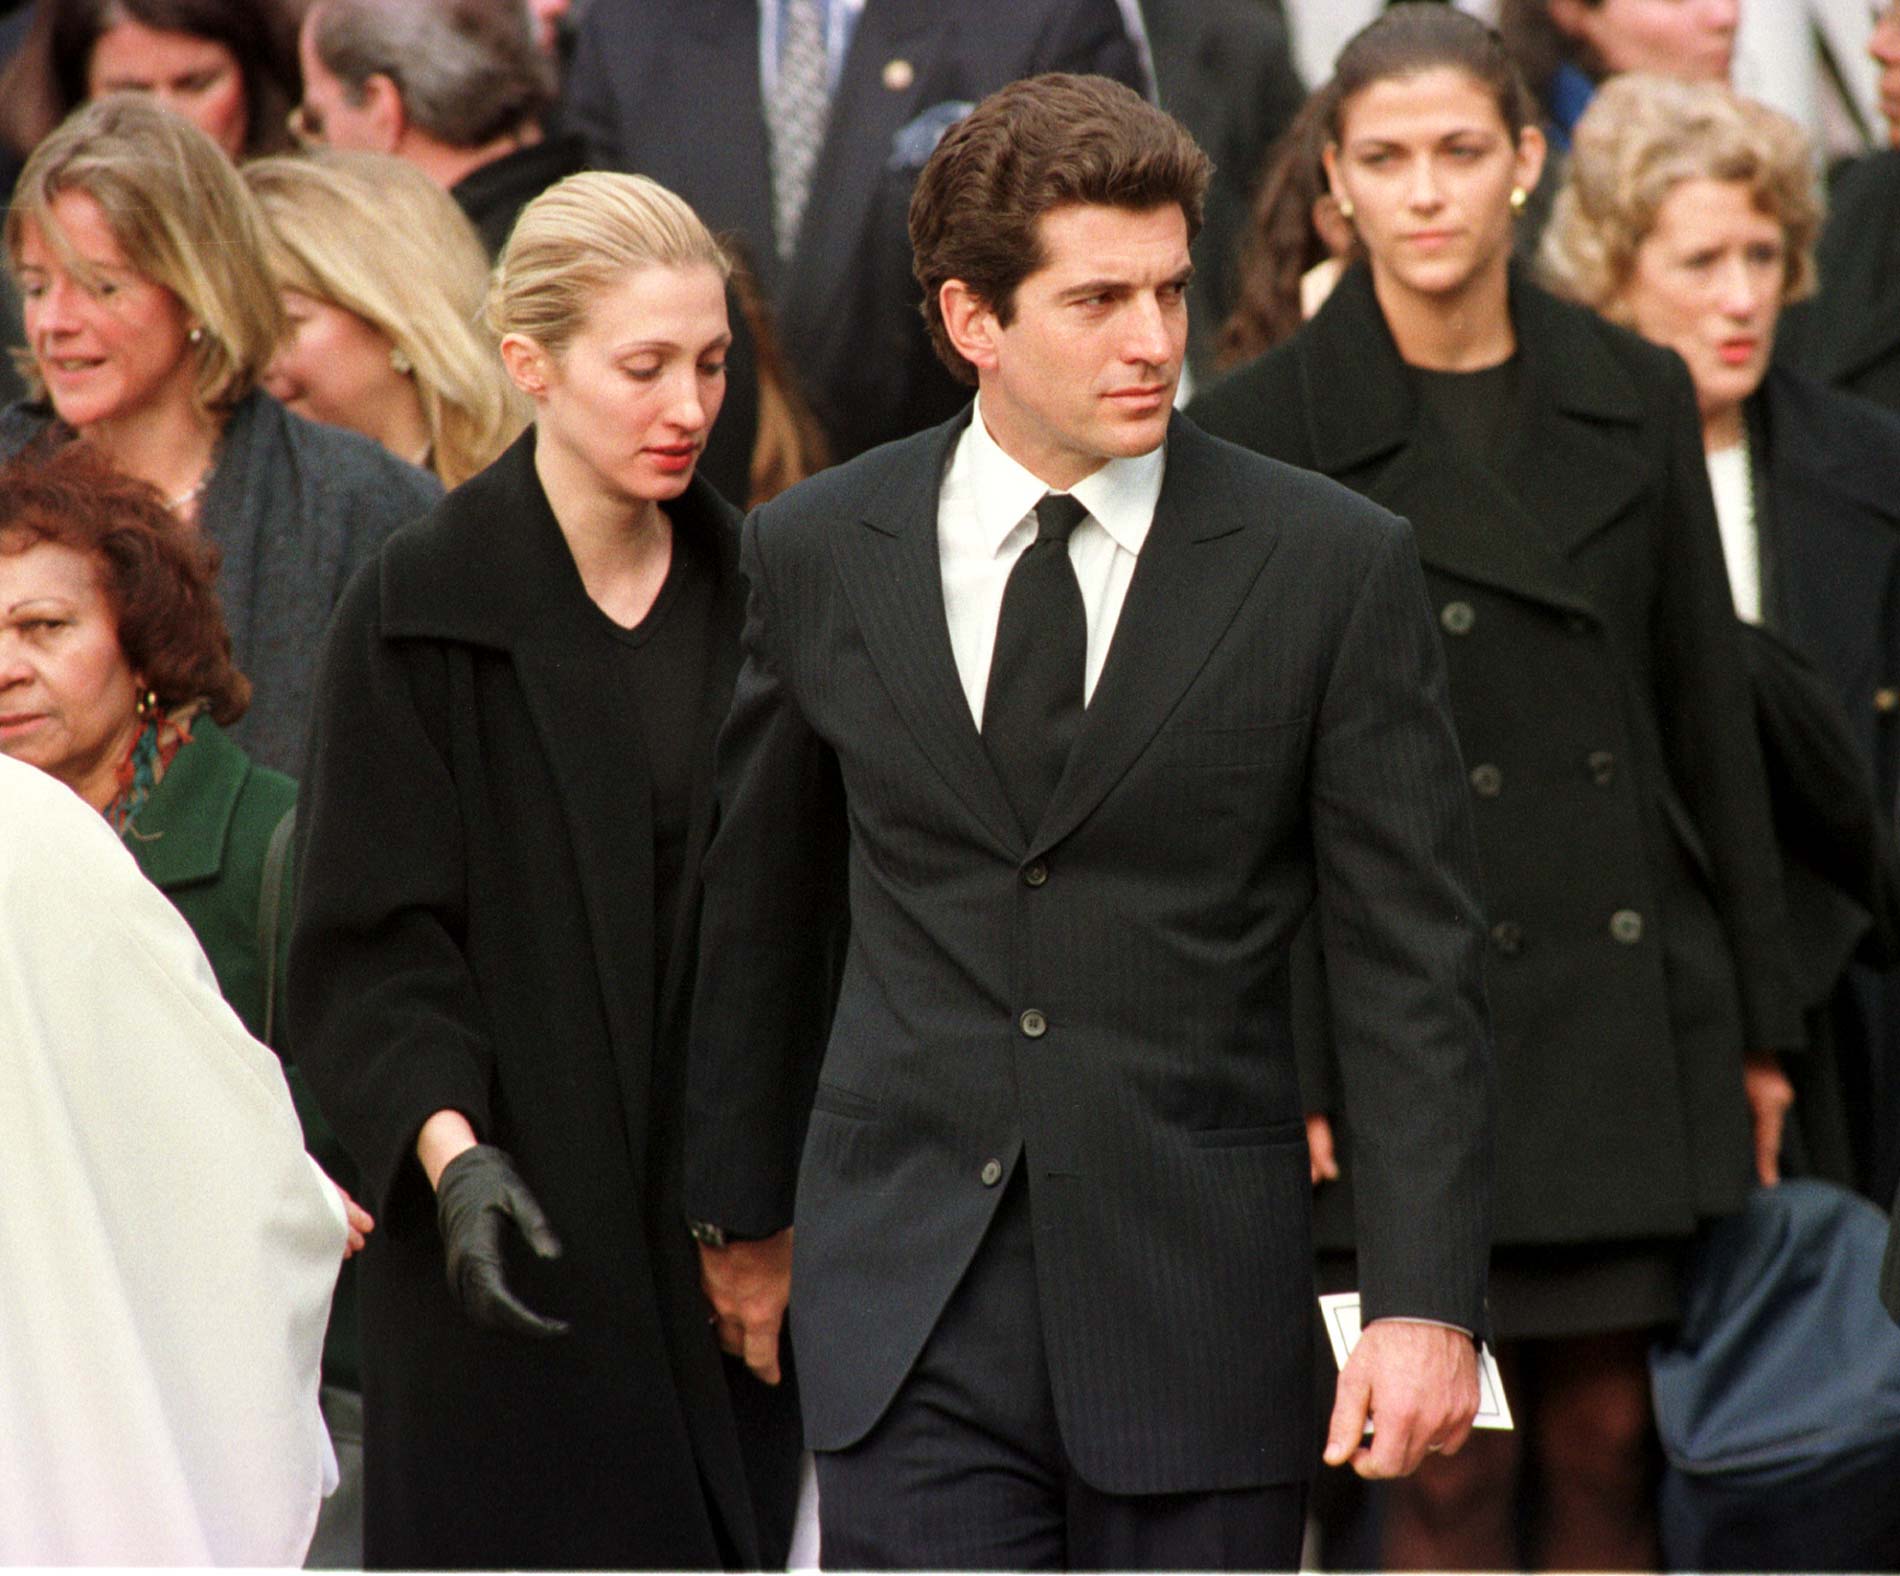 John F. Kennedy Jr. with his wife Carolyn after Michael Kennedy's funeral in 1998. | Source: Getty Images